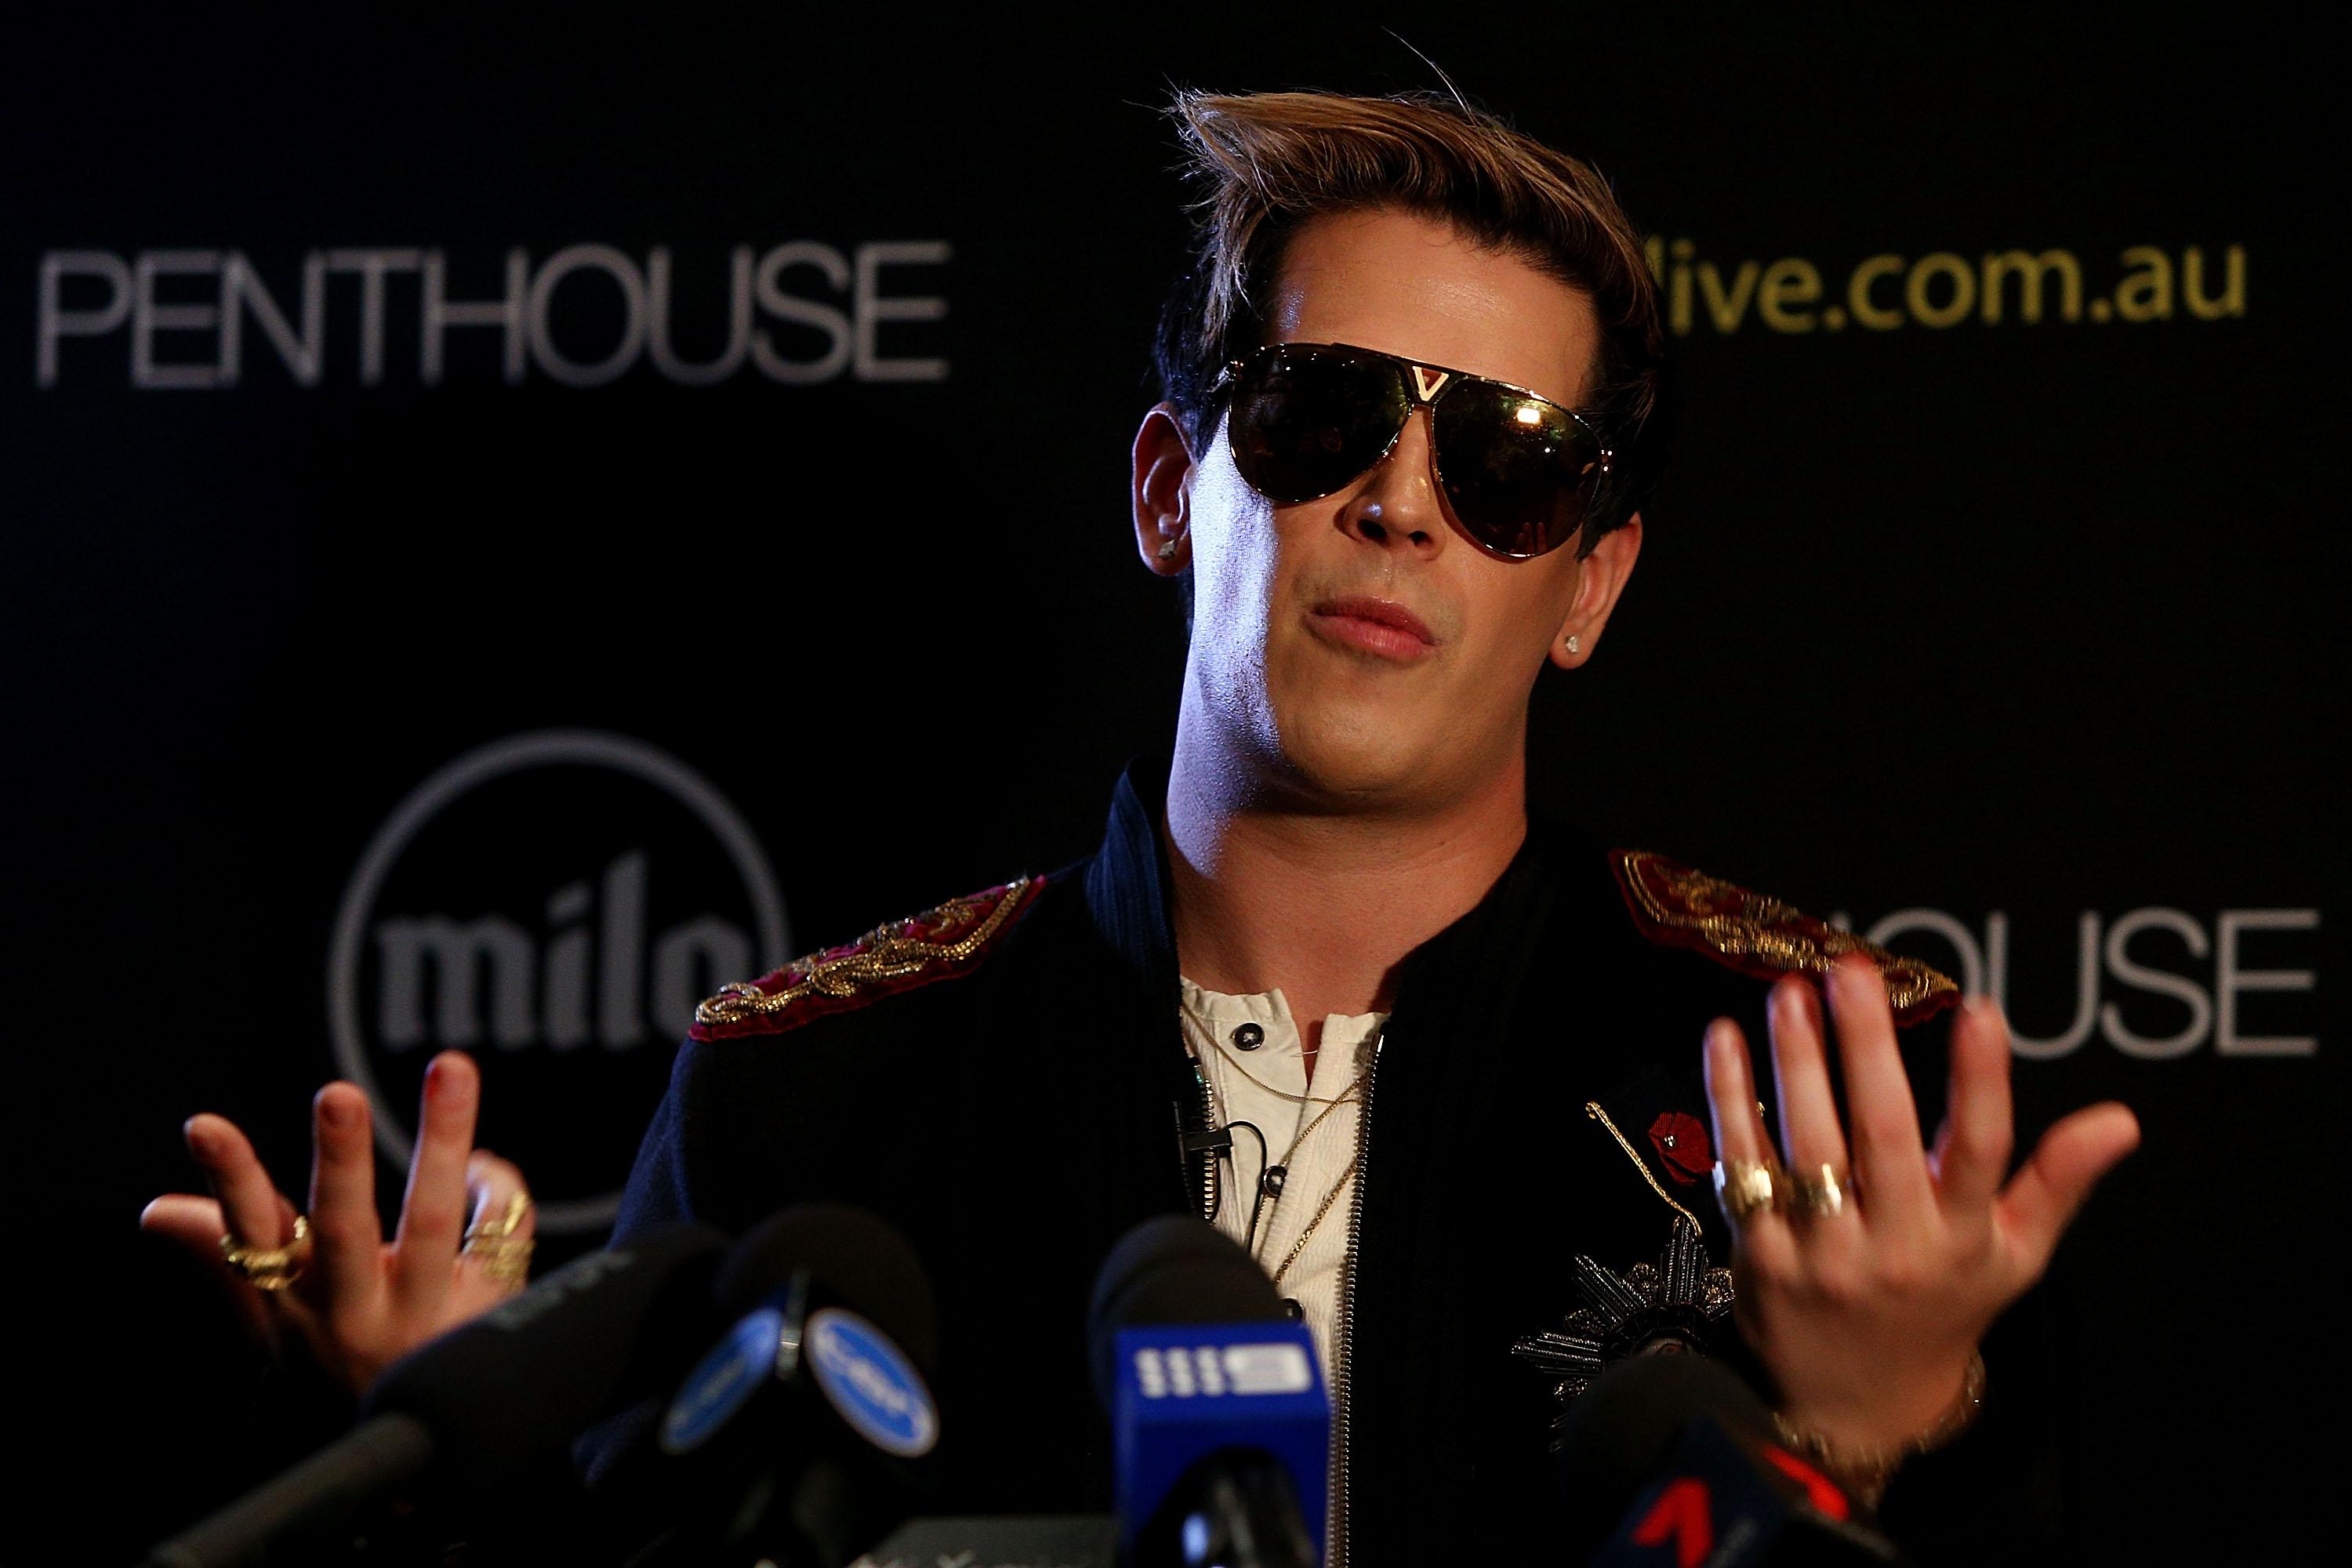 SYDNEY, AUSTRALIA - NOVEMBER 29:  Milo Yiannopoulos speaks during a press conference on November 29, 2017 in Sydney, Australia. Yiannopoulos is in Australia for his Troll Academy Tour.  (Photo by Lisa Maree Williams/Getty Images)